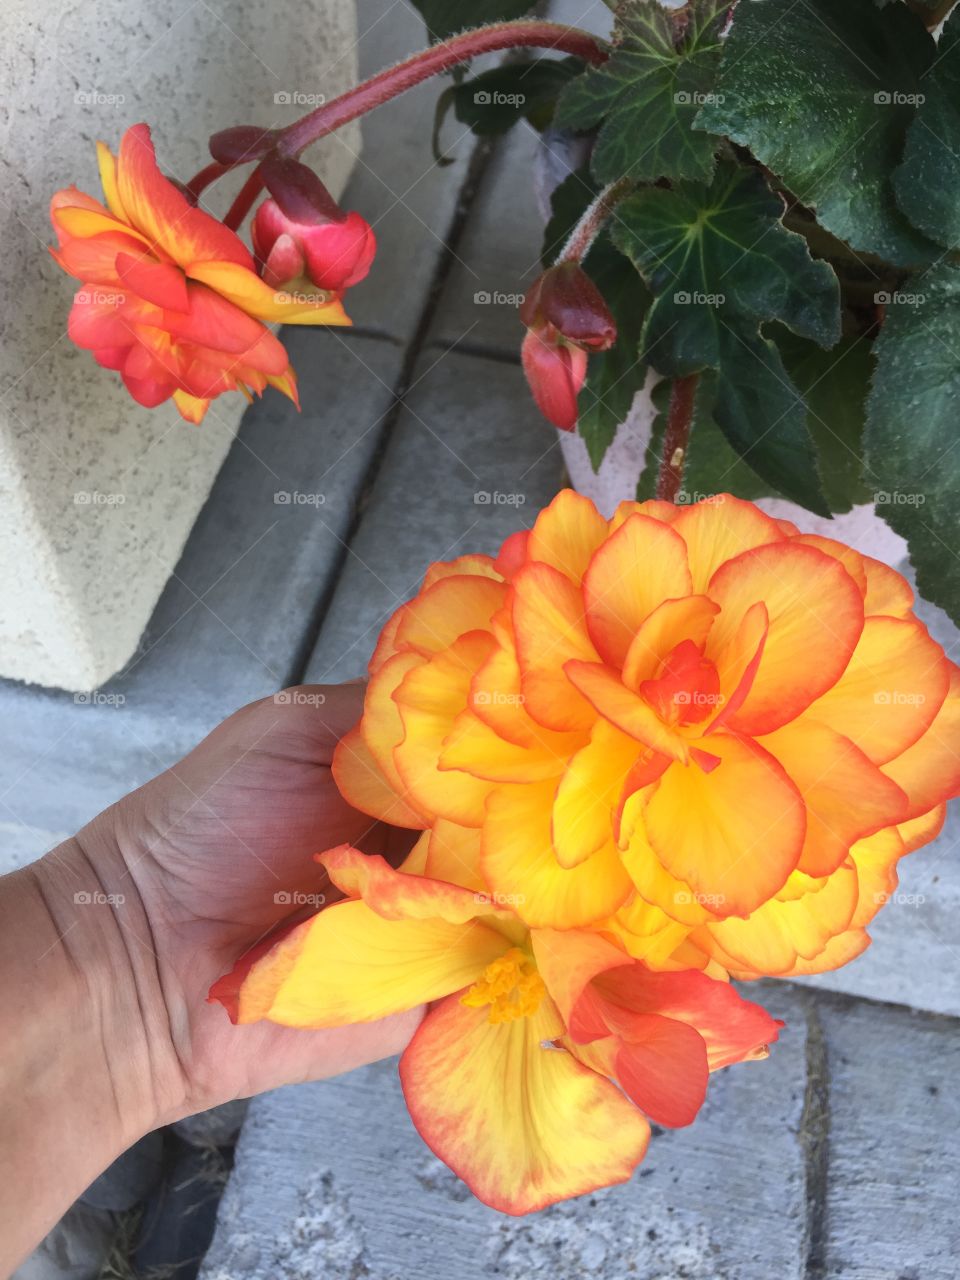 Begonia. Beautiful flowers. Yellow-red color, almost orange. Lasted a long time.